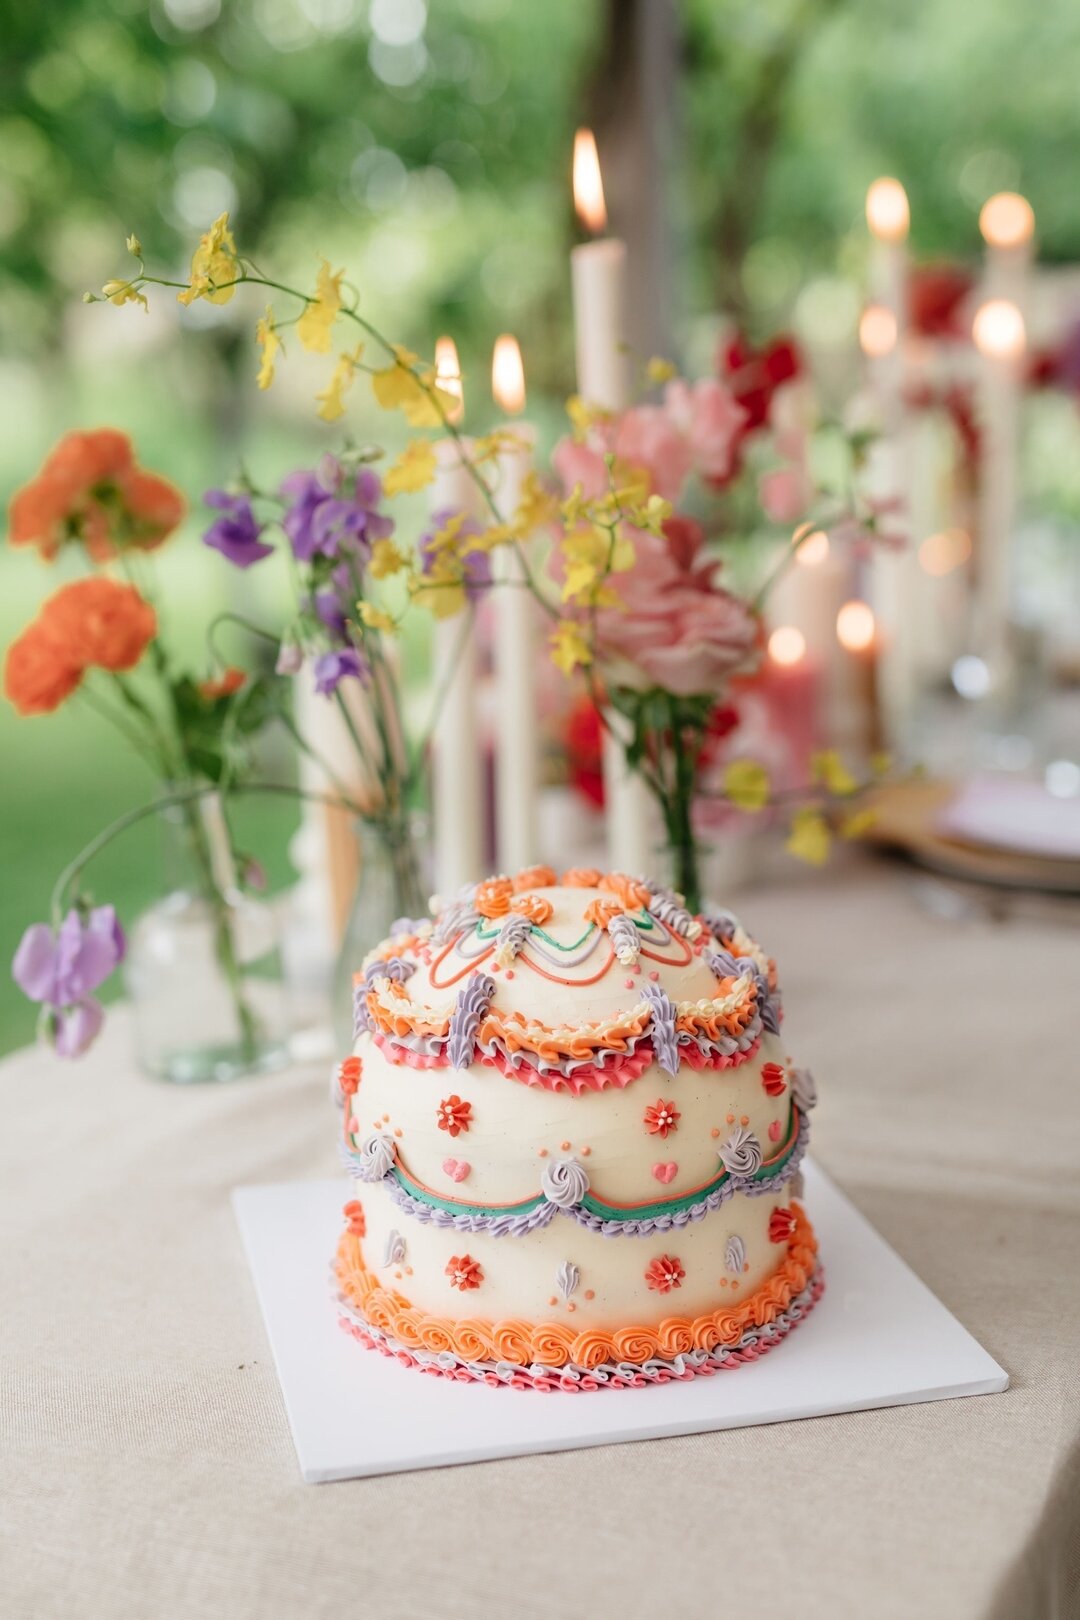 Lovers, don&rsquo;t forget that your cake can be used as a styling piece too. There are so many options for your cake which can serve as your dessert, a cute photo moment, and can be as considered as any floral arrangement. Have fun with it! ​​​​​​​​